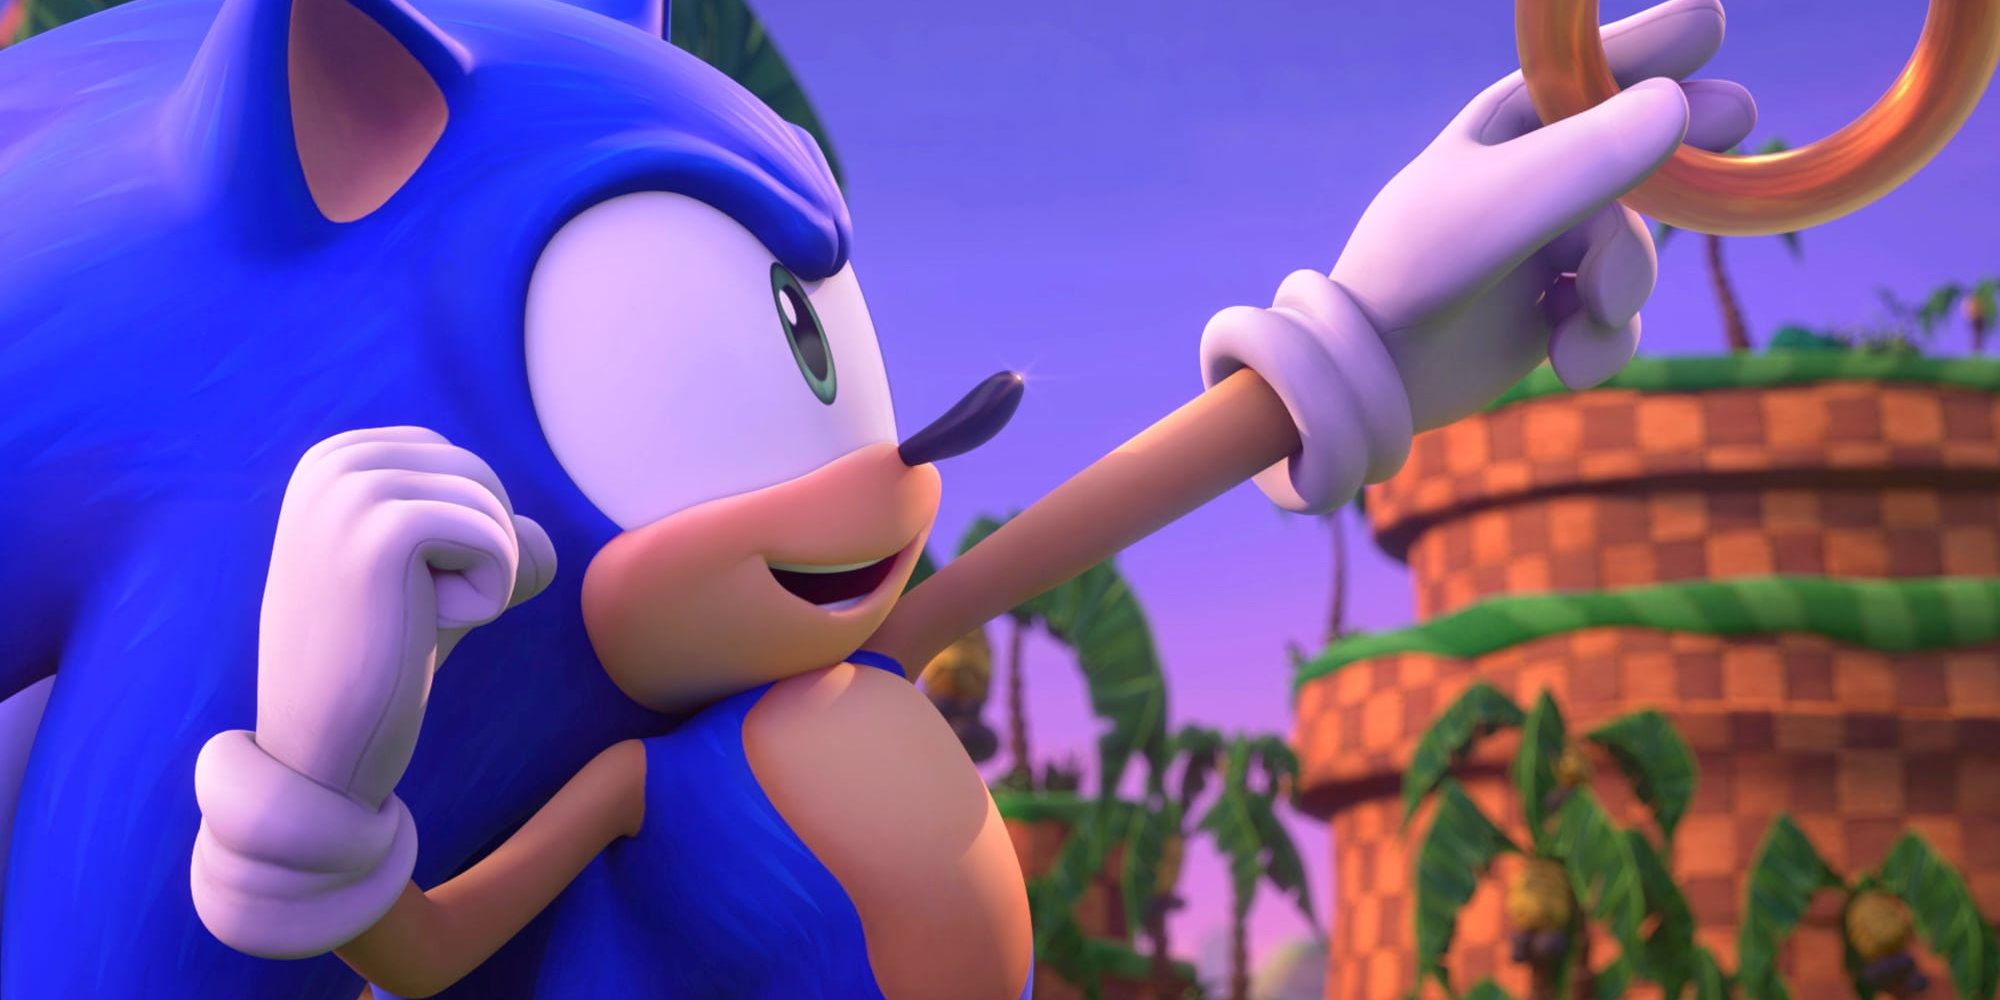 Sonic grabbing a ring with one hand while smiling.